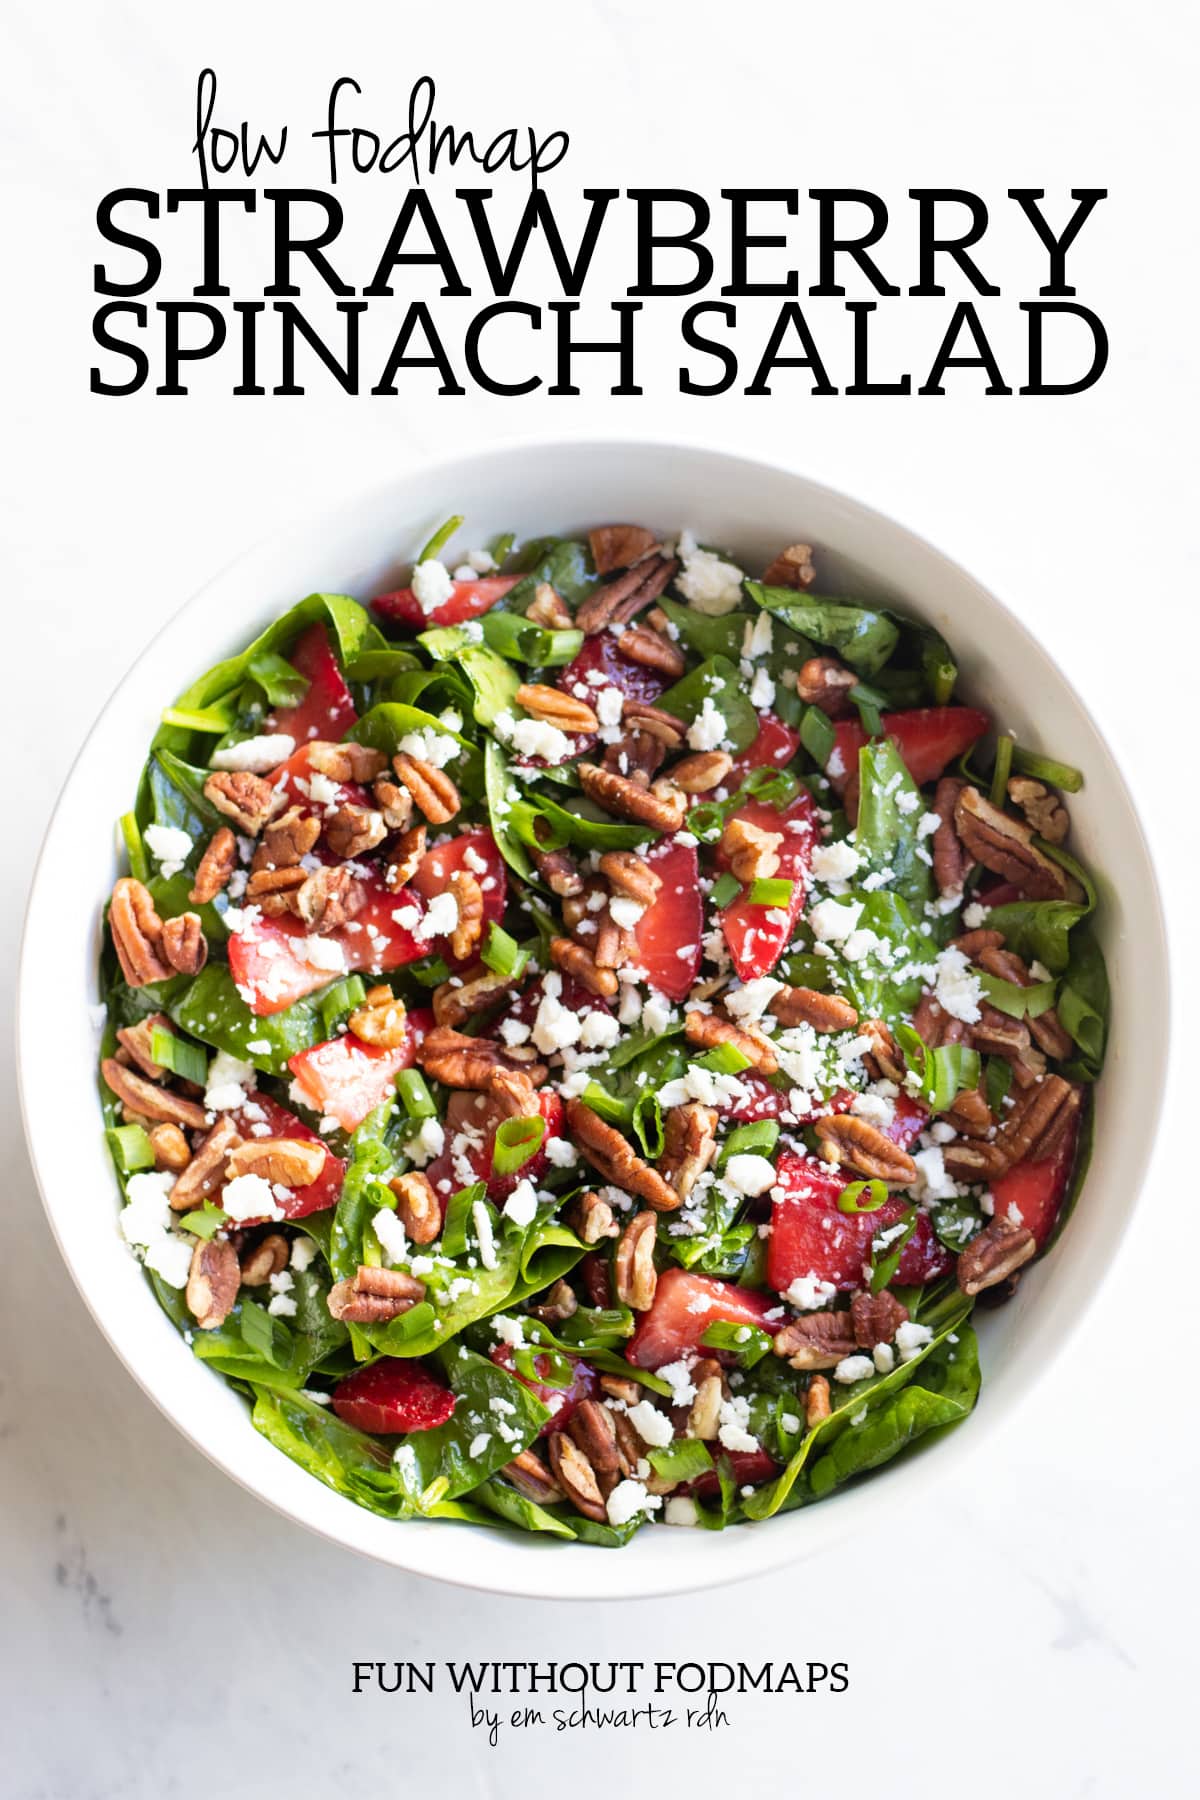 A large white bowl filled with spinach, sliced strawberries, crumbled feta, pecan pieces, and sliced green onion tops. Above the bowl black text reads "Low FODMAP Strawberry Spinach Salad". Below the bowl text says "FUN WITHOUT FODMAPS by Em Schwartz RDN".